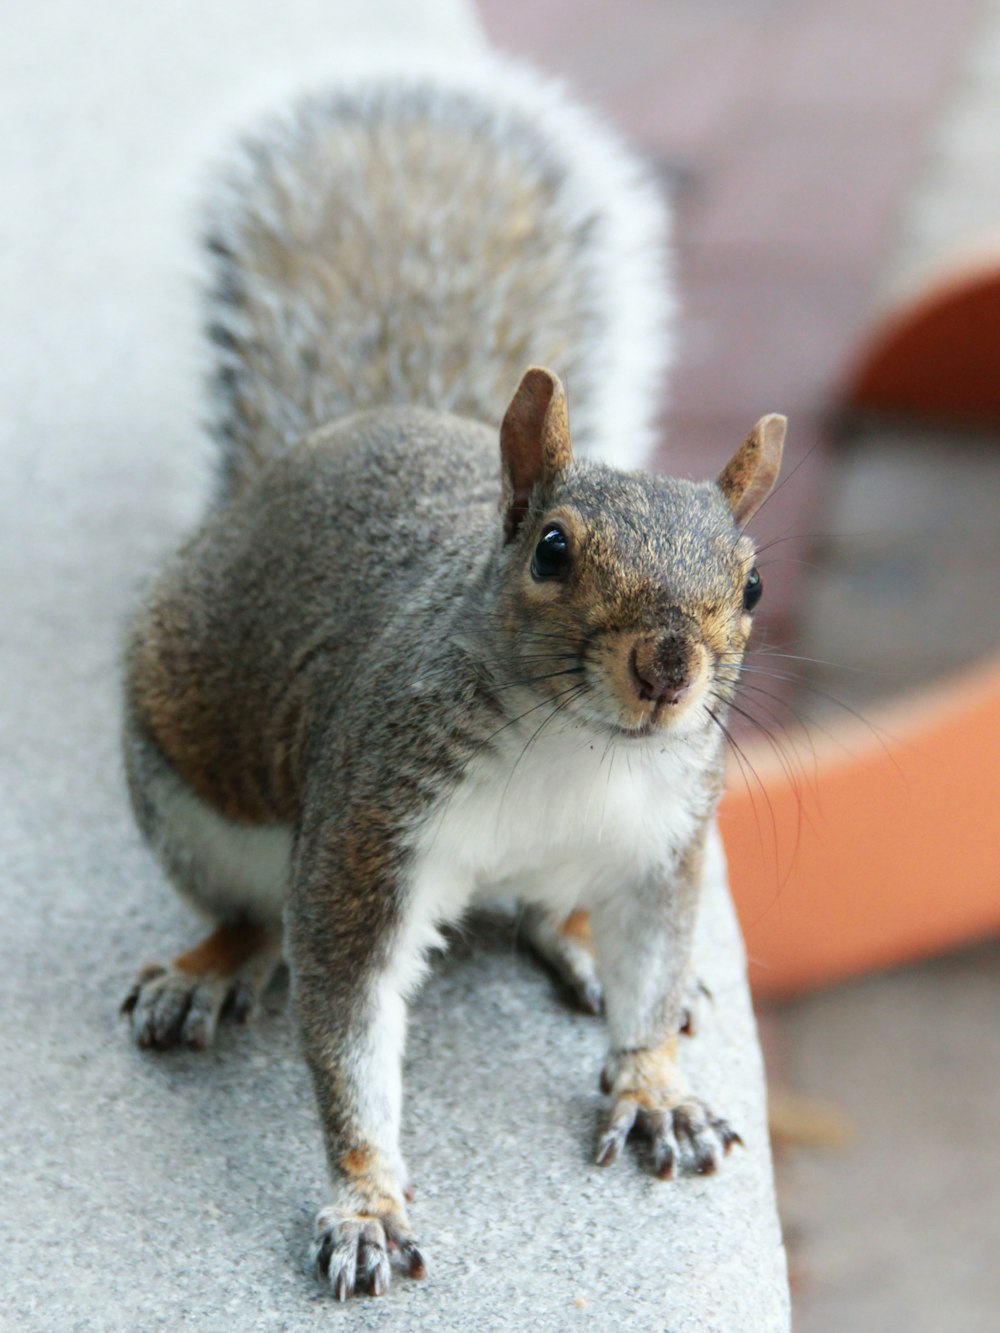 gray and white squirrel on gray concrete floor